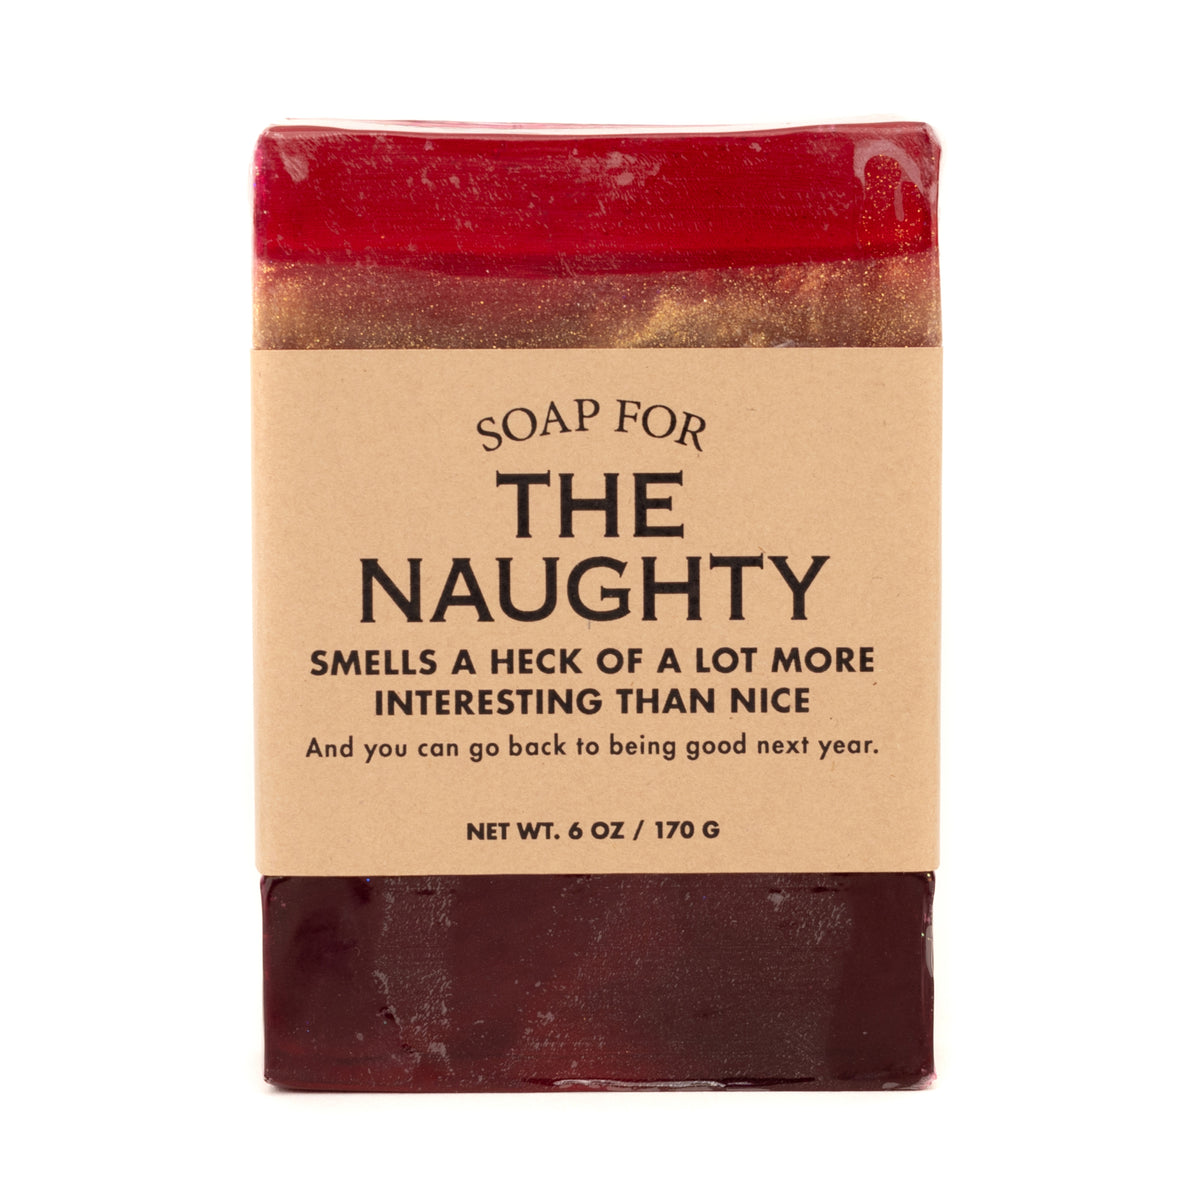 A Soap For The Naughty